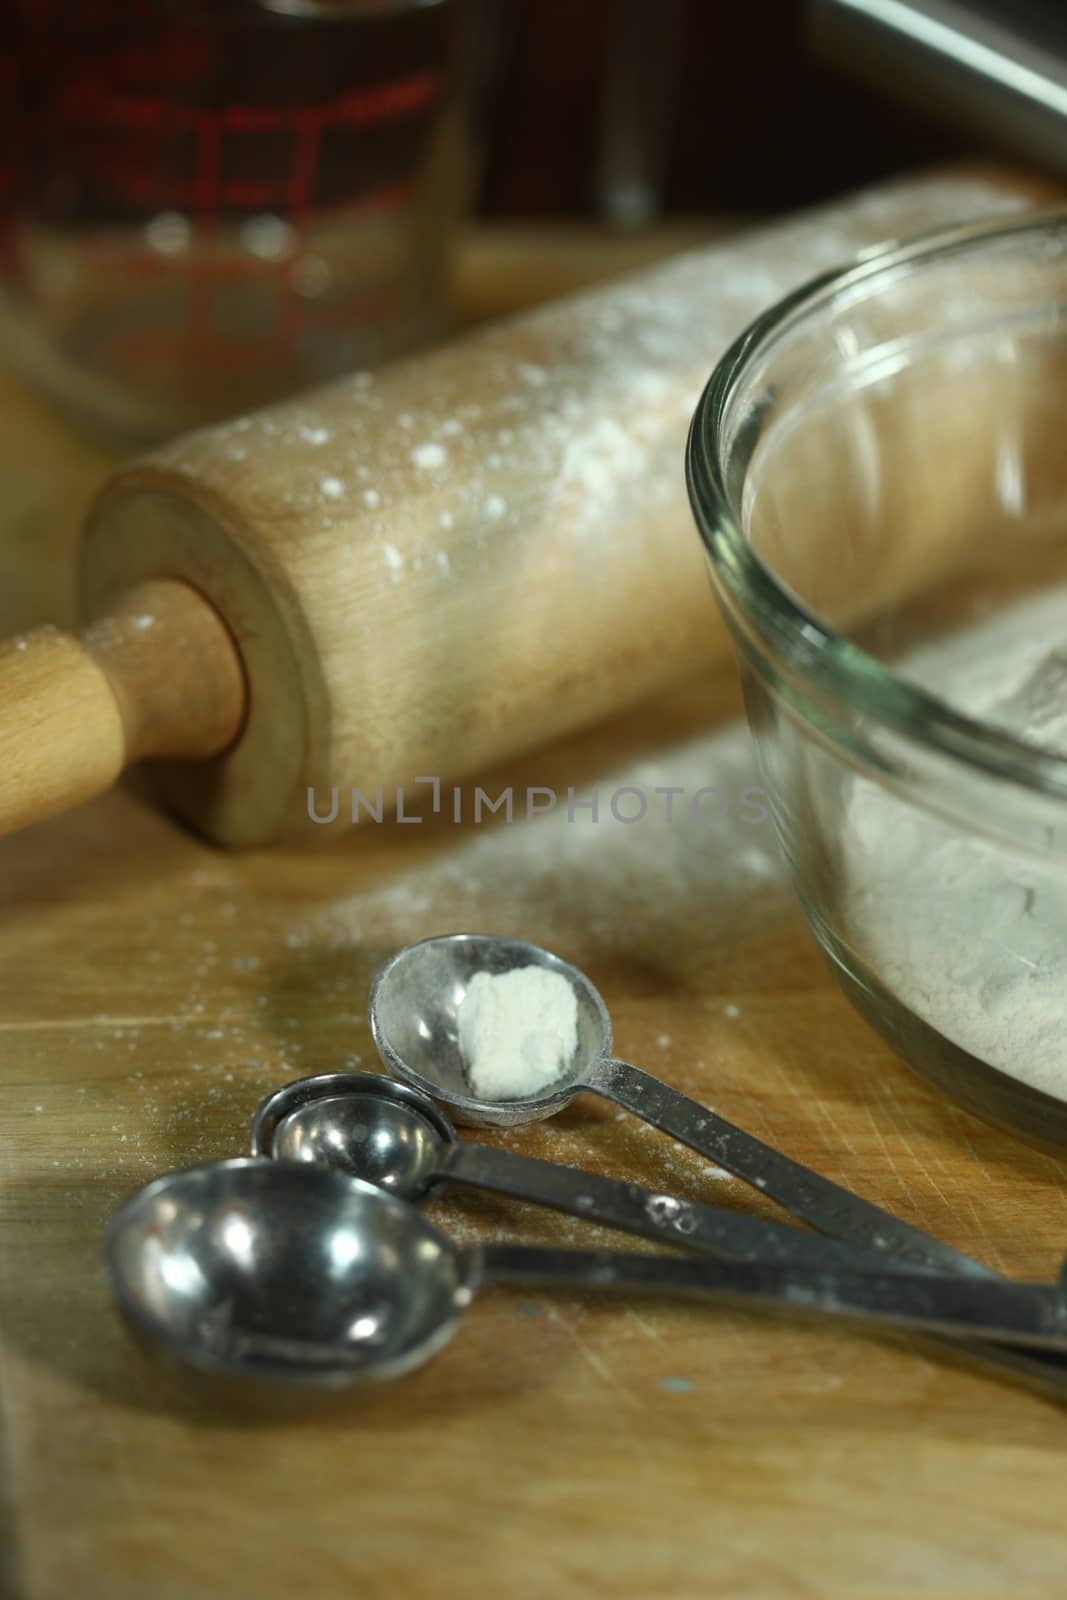 Bread Baking Ingredients on a Wooden Background by tobkatrina